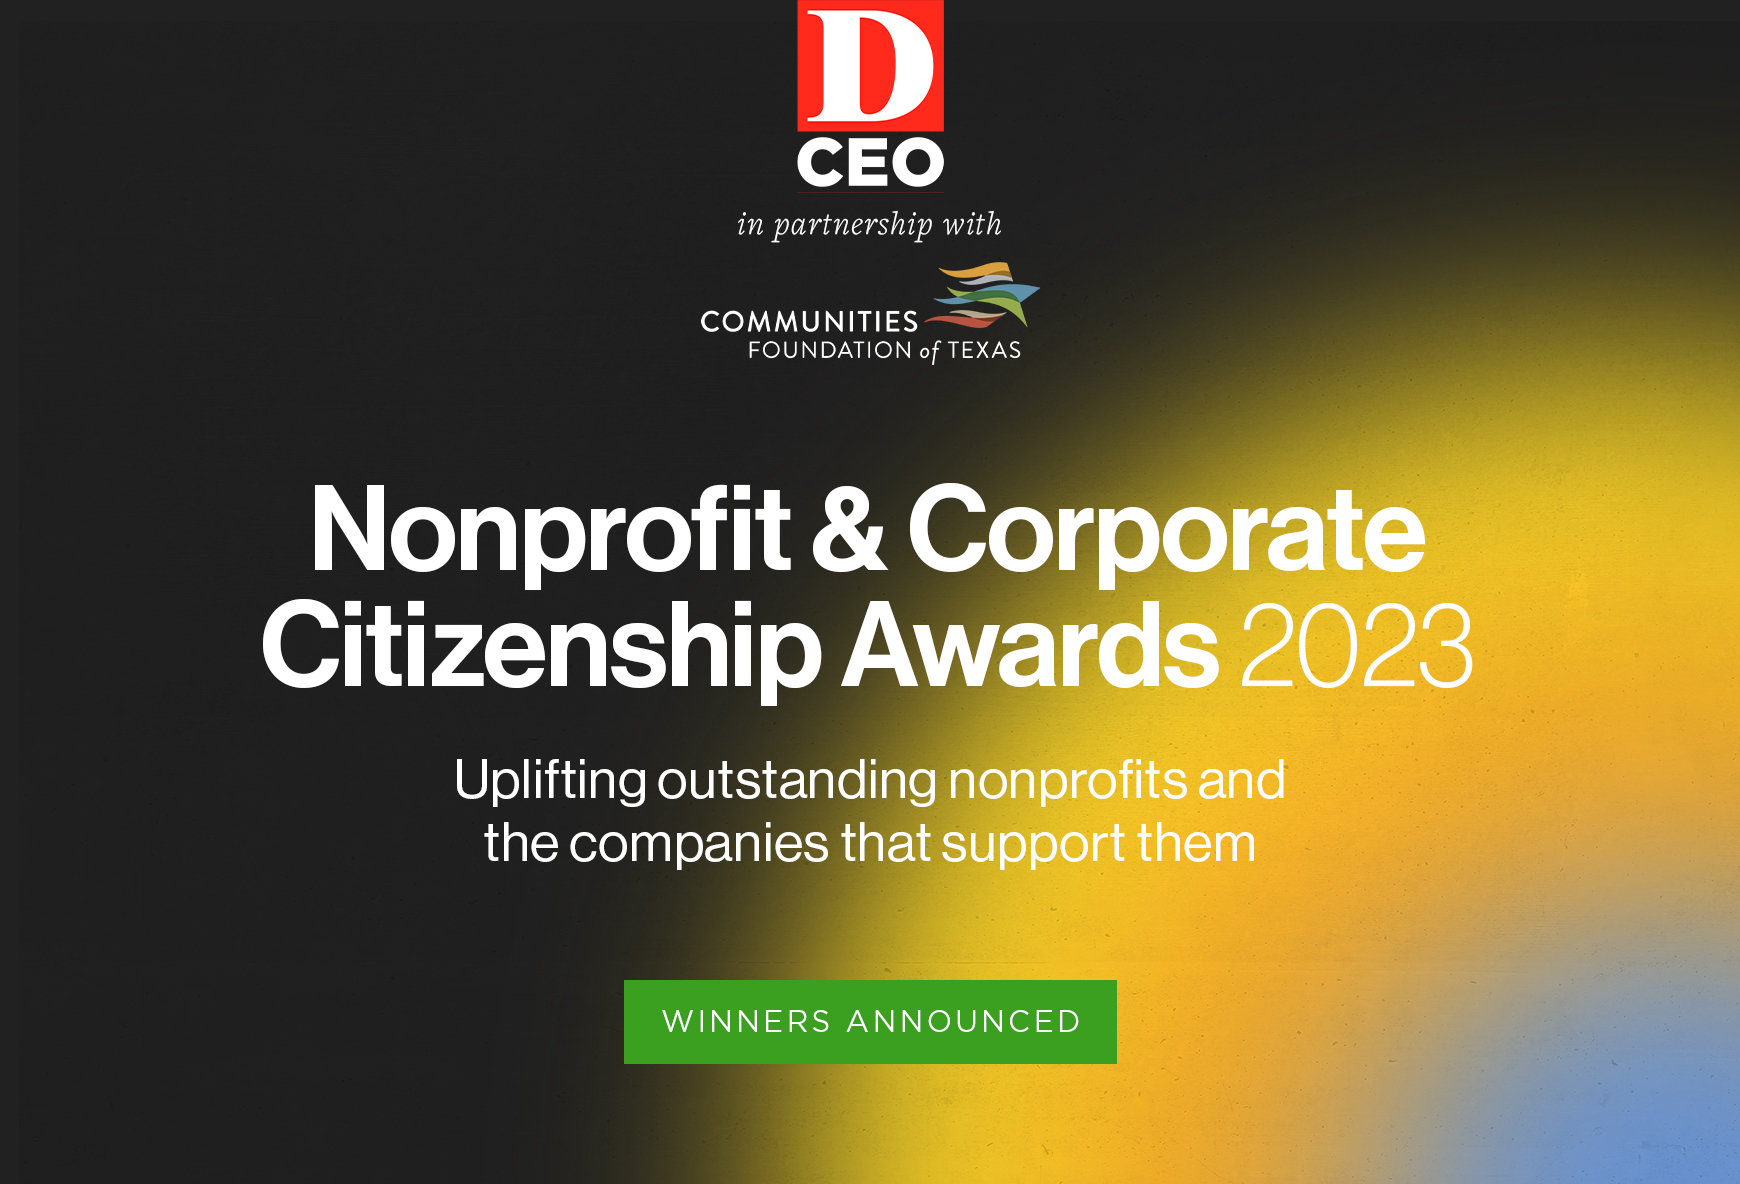 Winners Announced D CEOs 2023 Nonprofit and Corporate Citizenship Awards pic